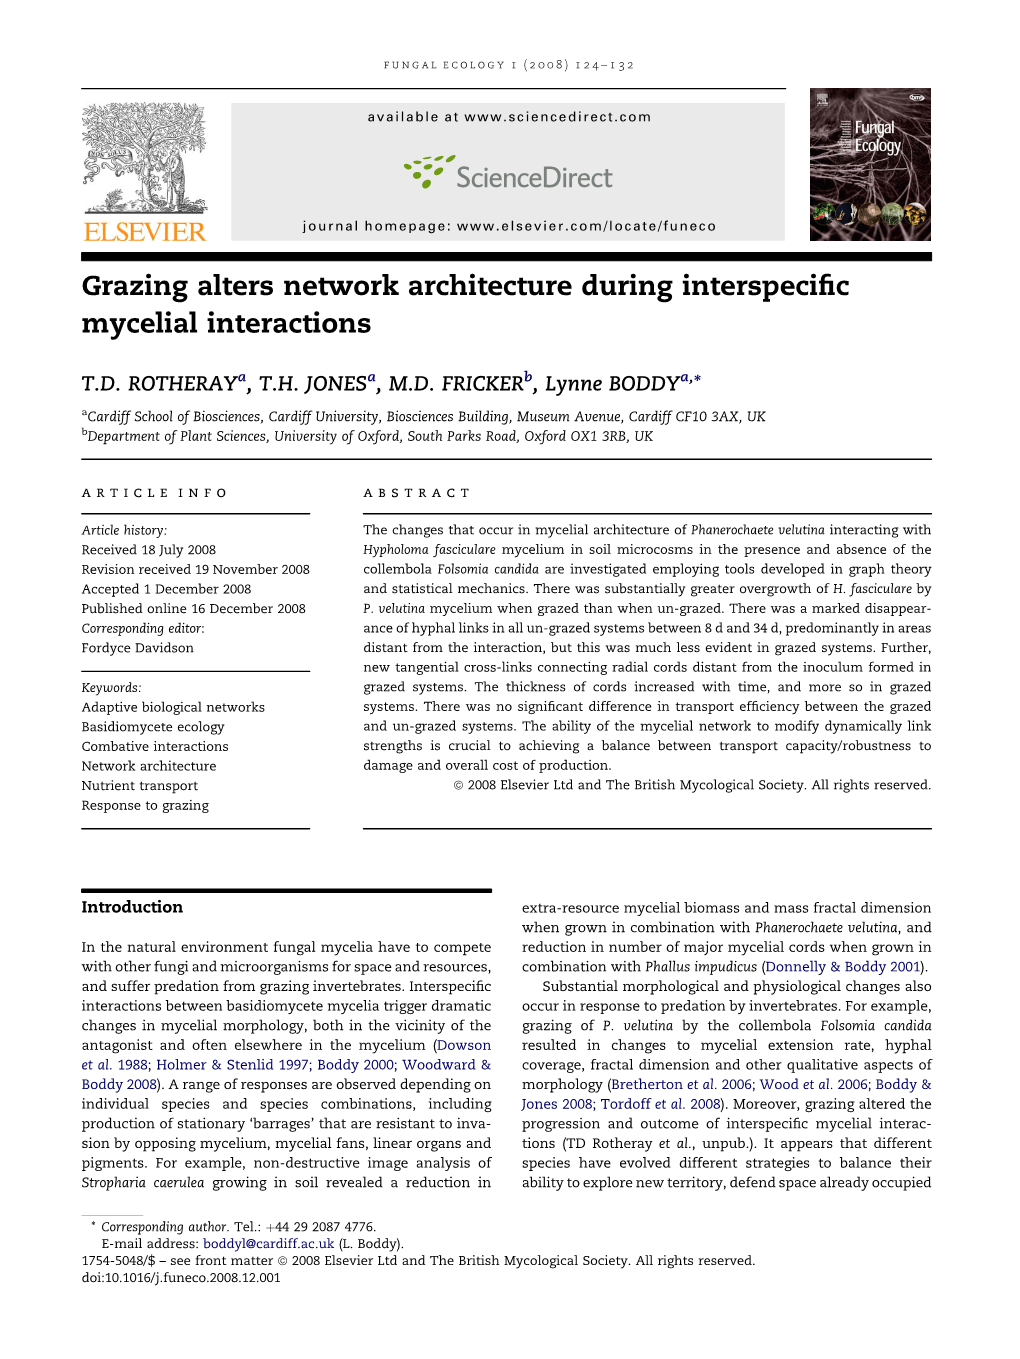 Grazing Alters Network Architecture During Interspecific Mycelial